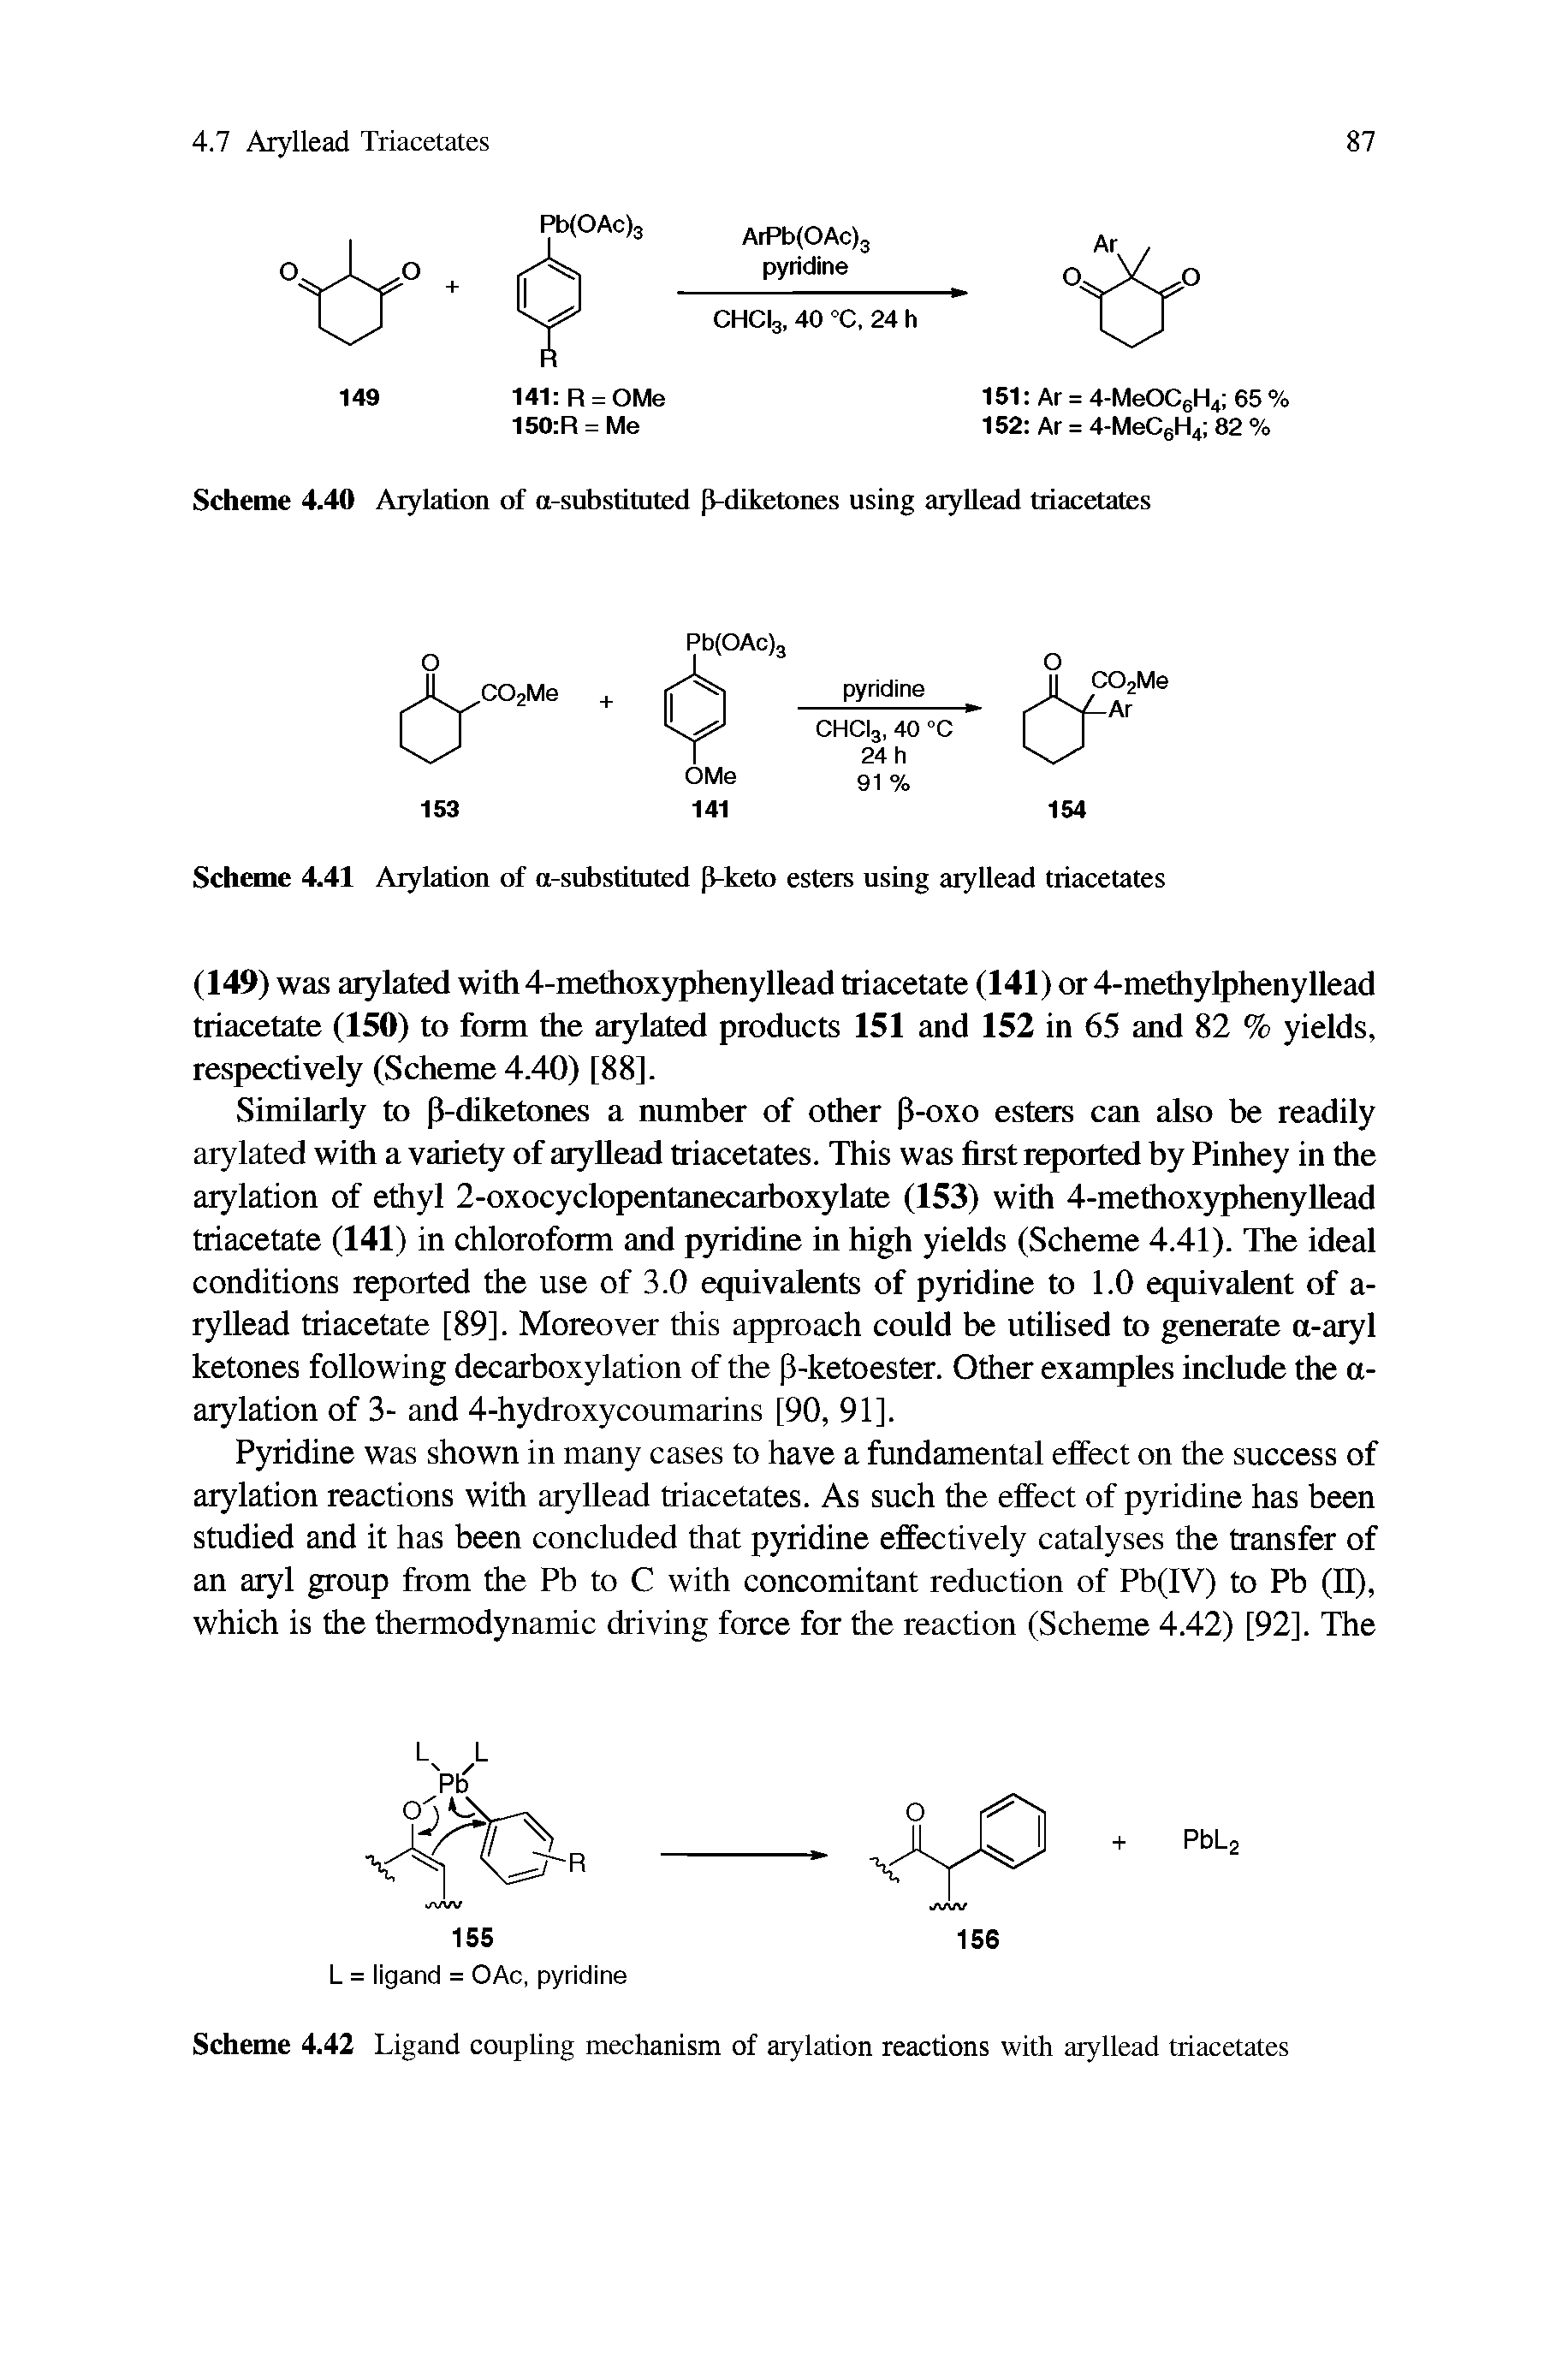 Scheme 4.41 Arylation of a-substituted p-keto esters using aryllead triacetates...